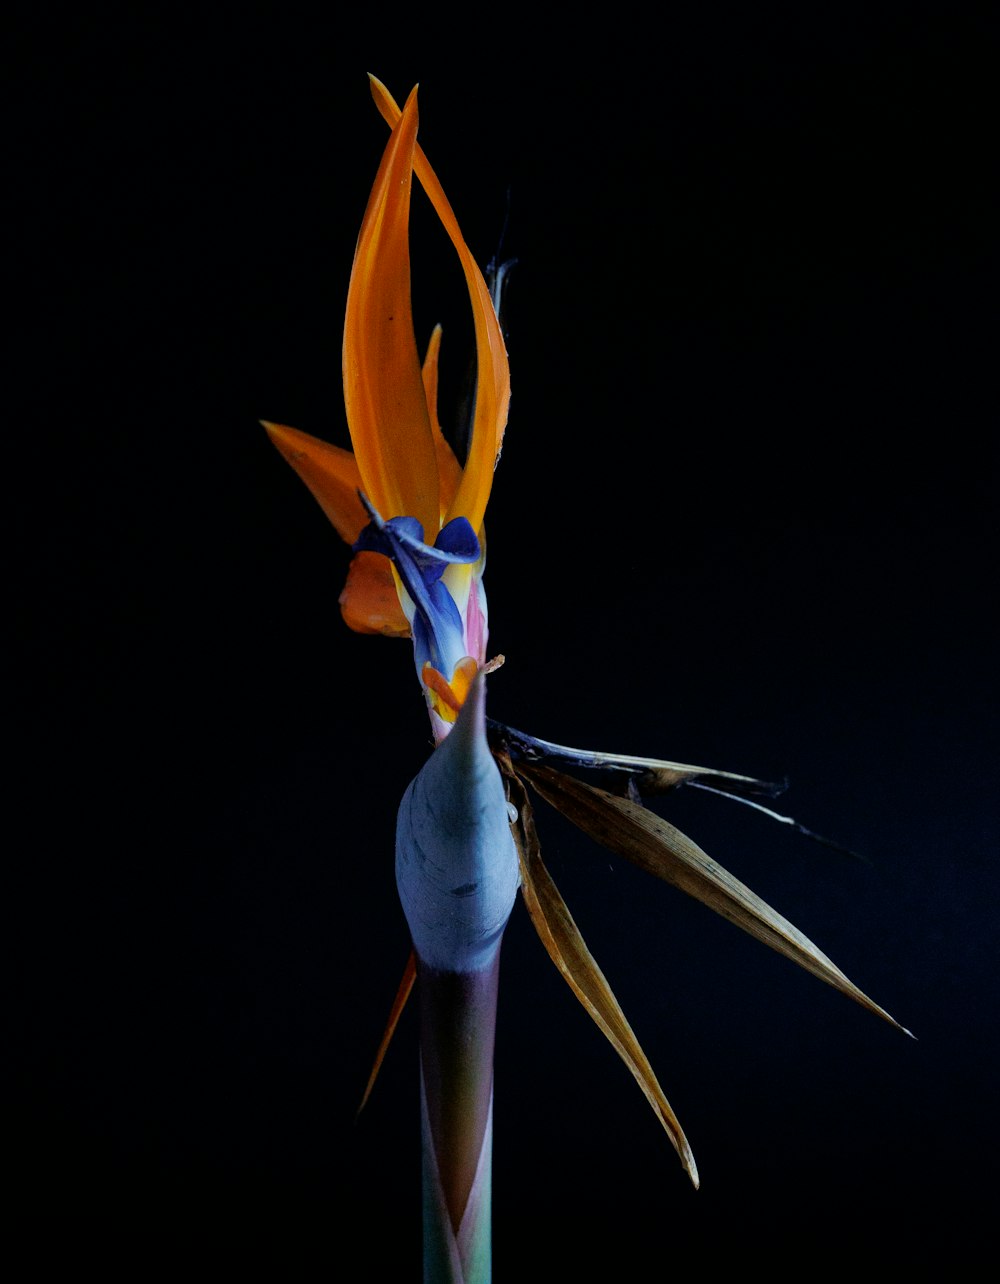 a bird of paradise flower in a vase on a black background